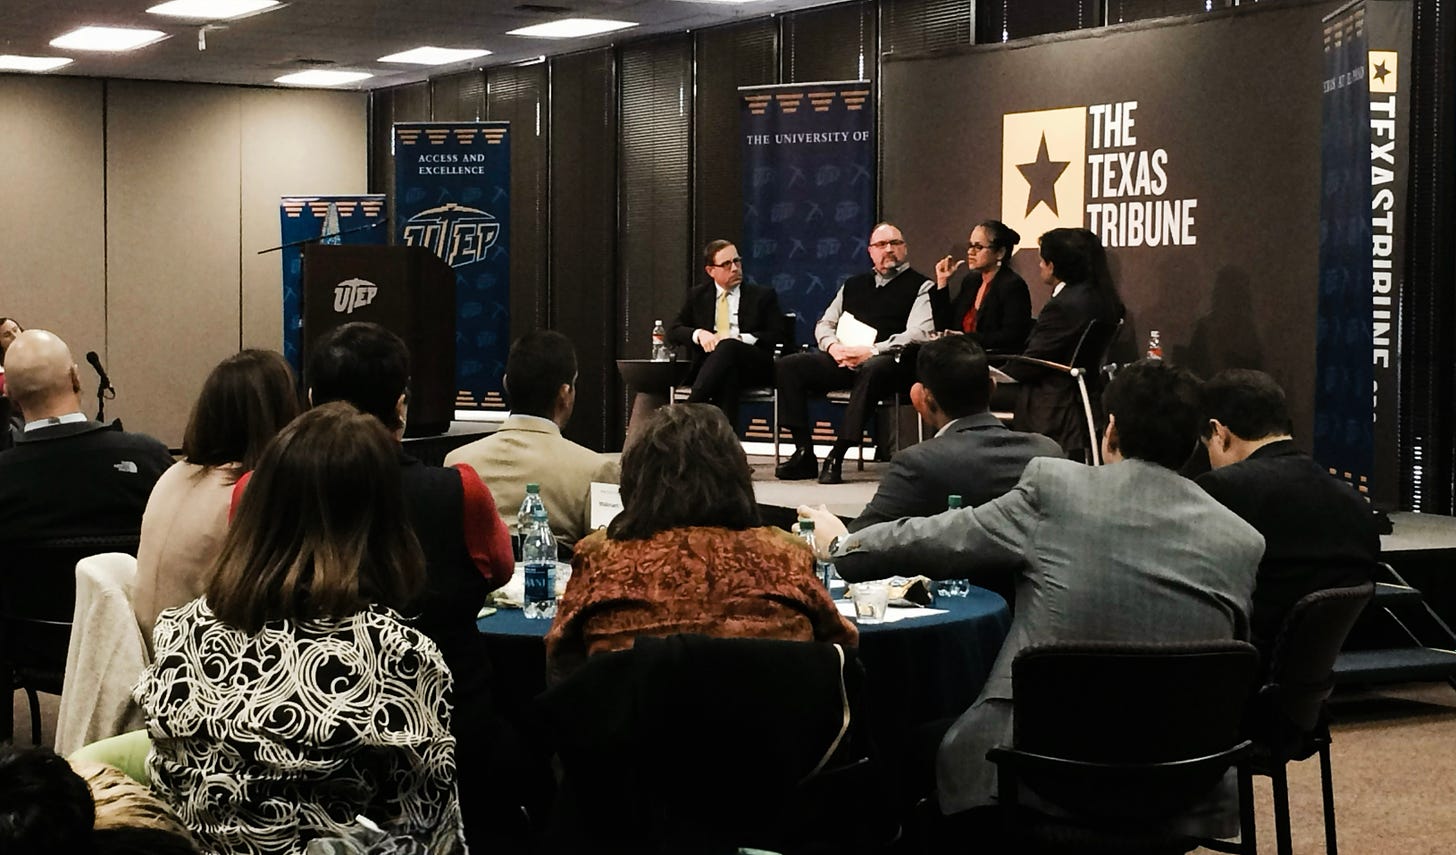 Evan Smith leading a Texas Tribune panel discussion at The University of Texas El Paso in 2015